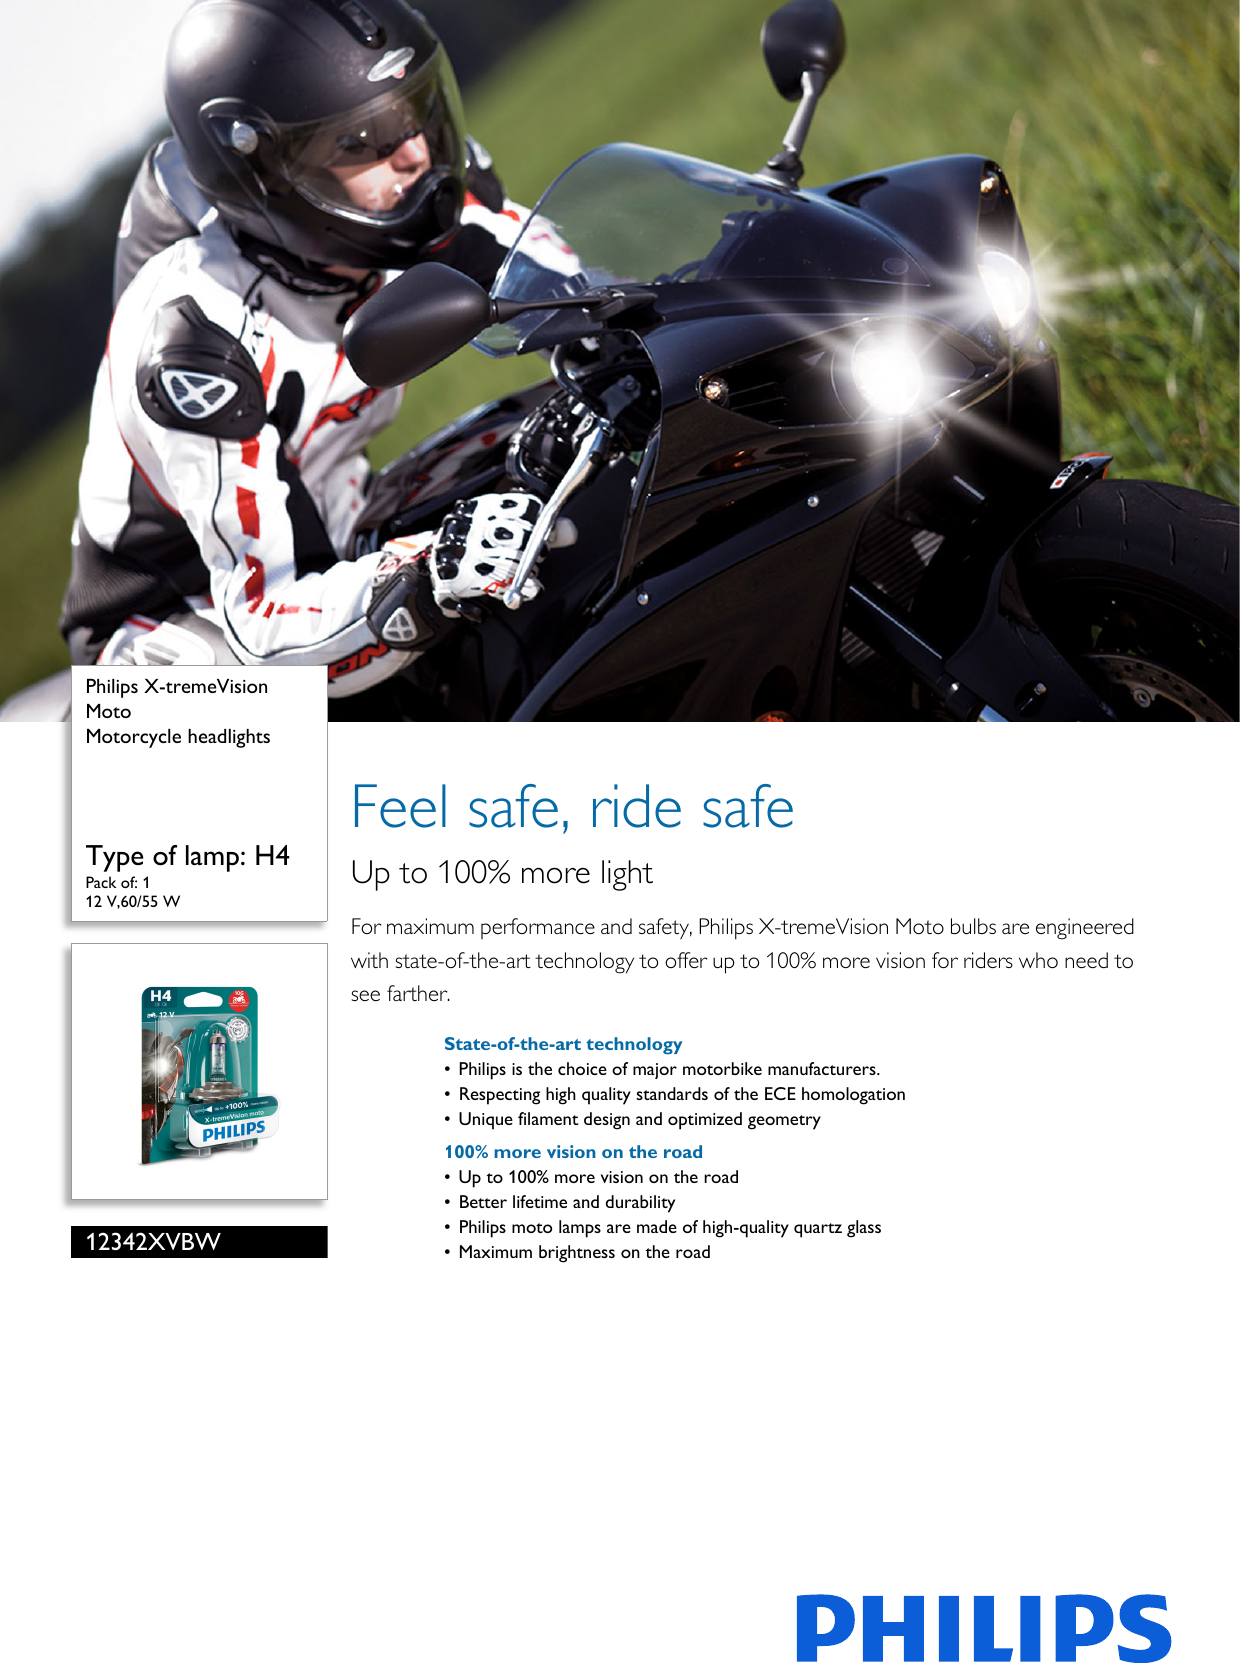 Page 1 of 2 - Philips 12342XVBW Motorcycle Headlights User Manual Leaflet Pss Engau